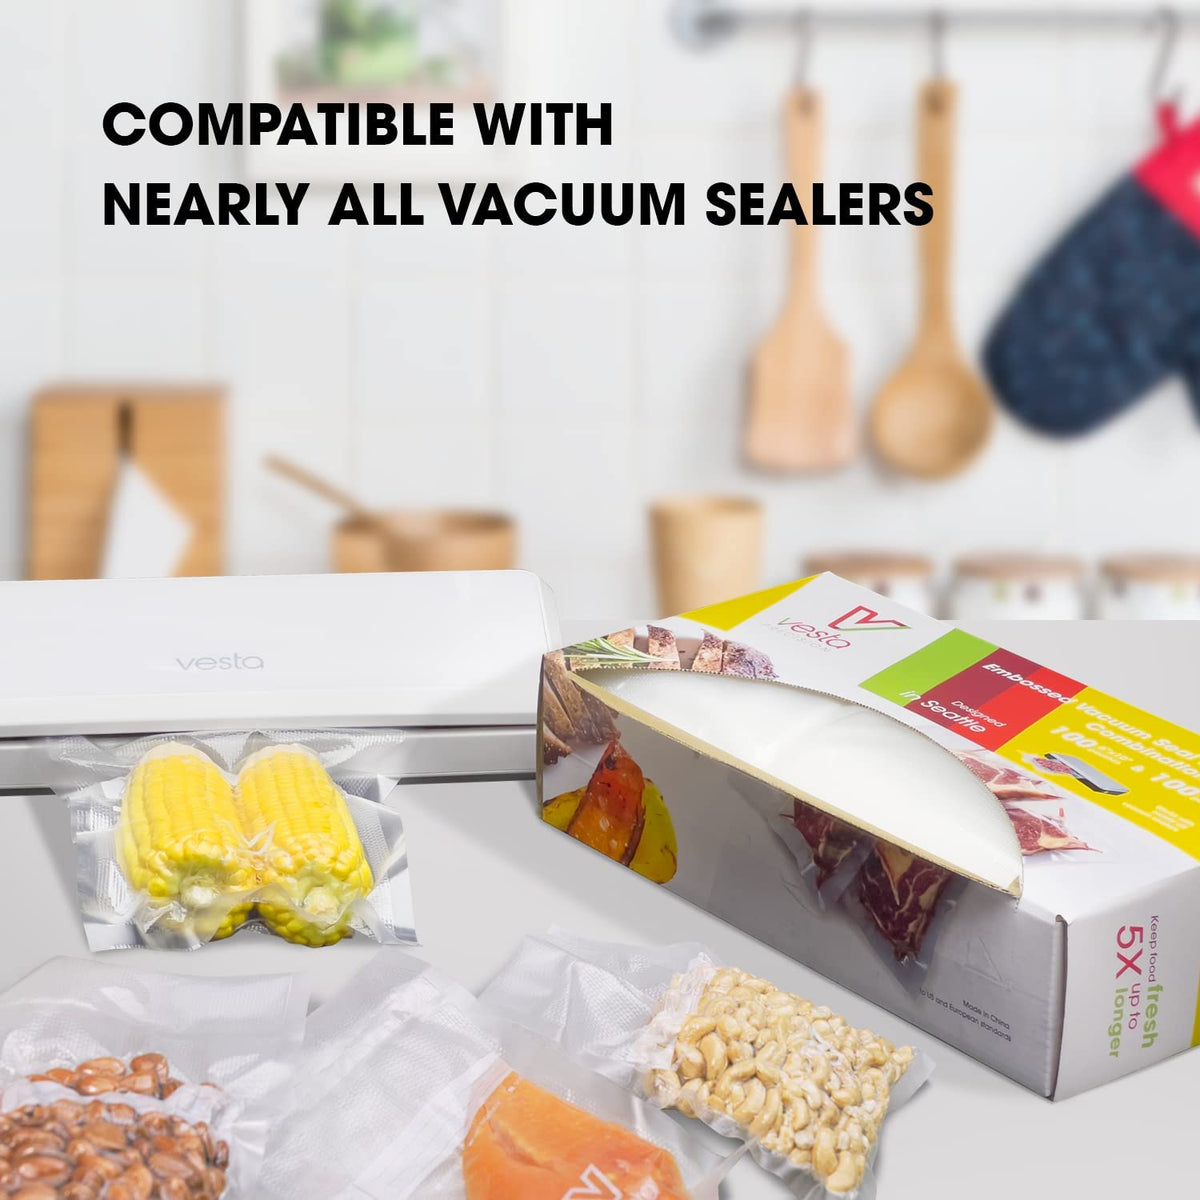 A picture describing the compatibility of the boxed vacuum seal bags with other vacuum sealers.